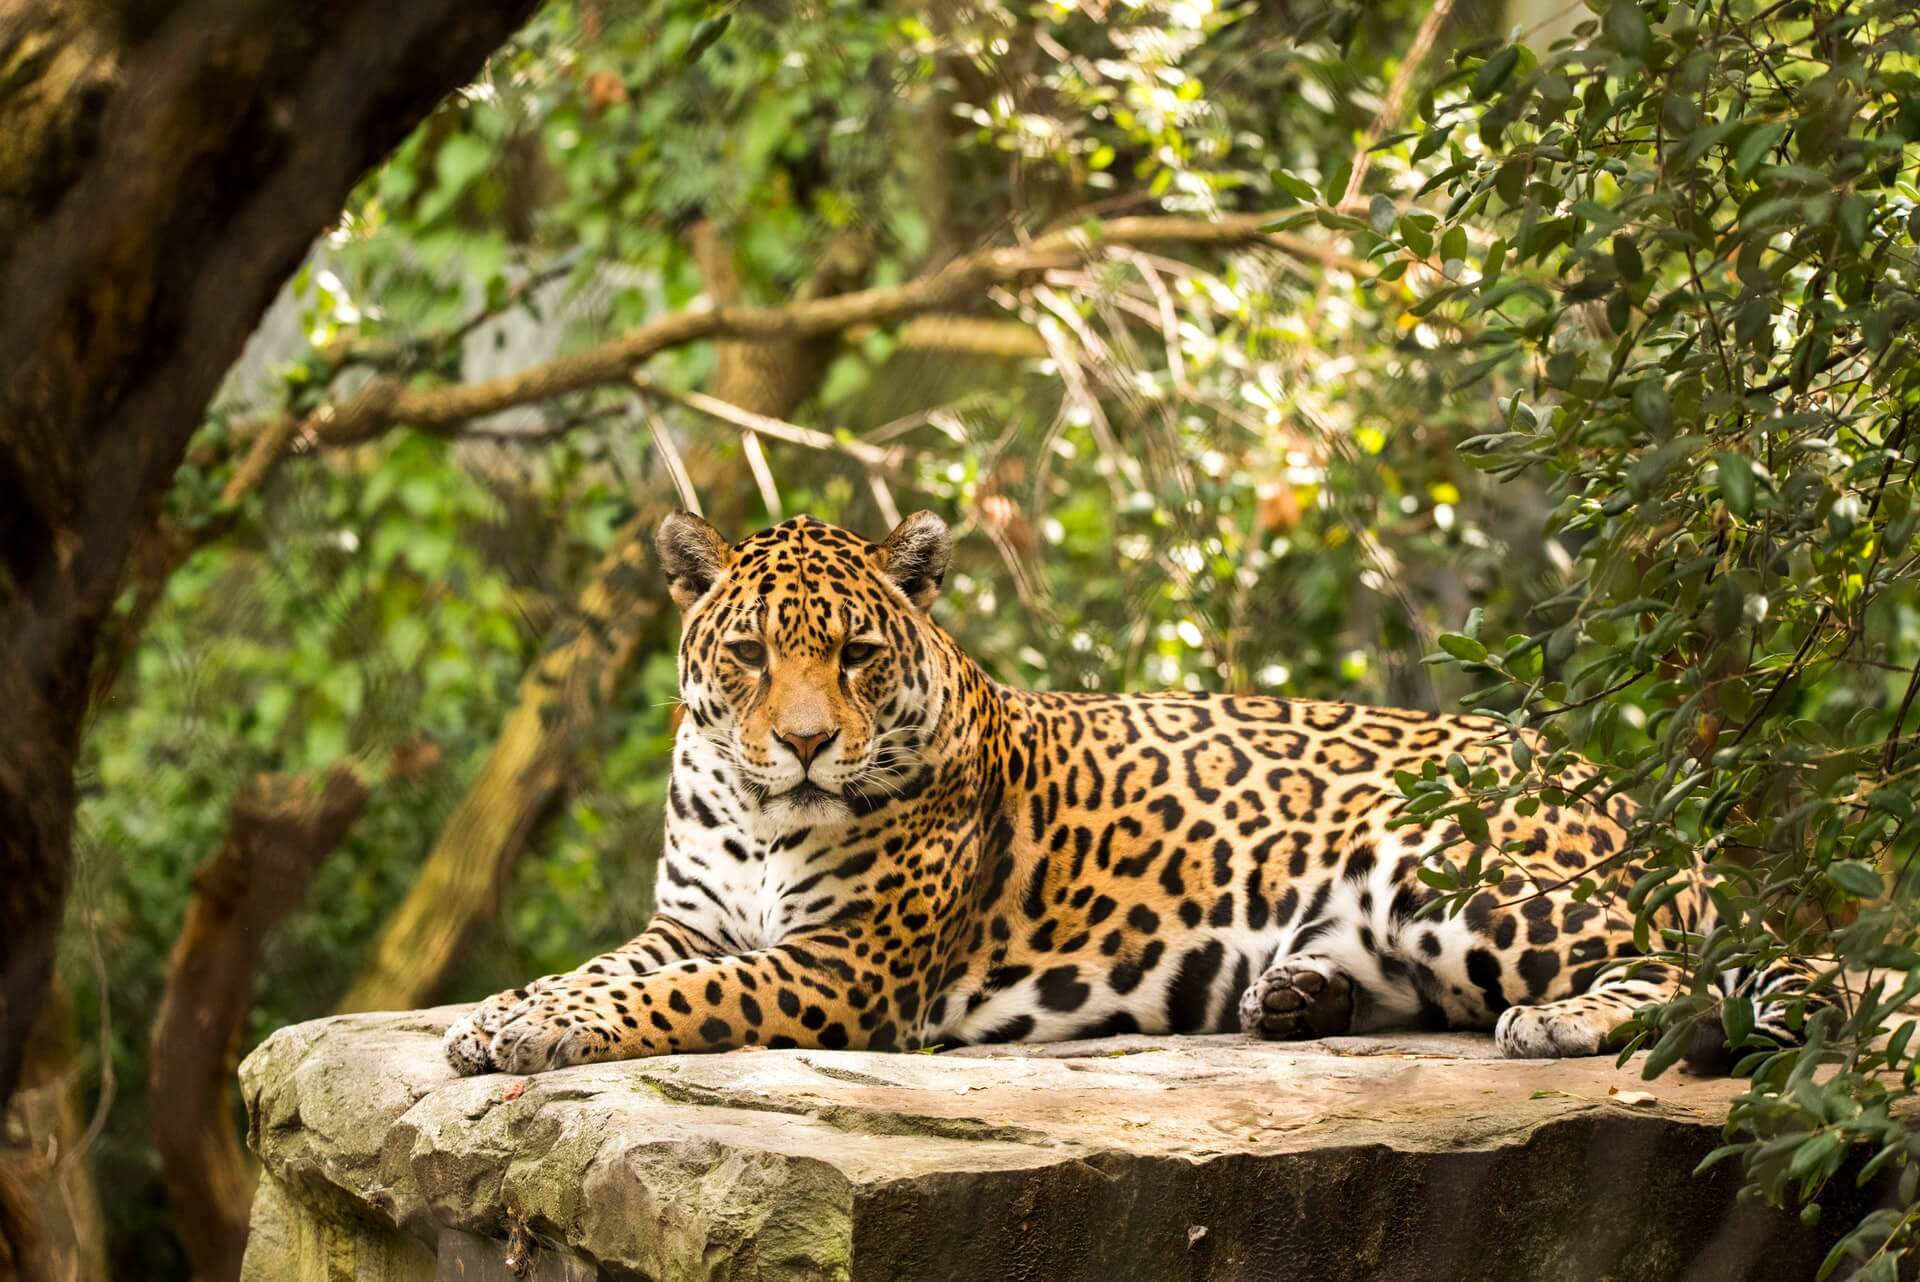 According to the first two censuses of the the elusive predators ever conducted, Mexico’s jaguar population increased by about 800 individuals from 2010 to 2018, confirming the national strategy to protect them is working.